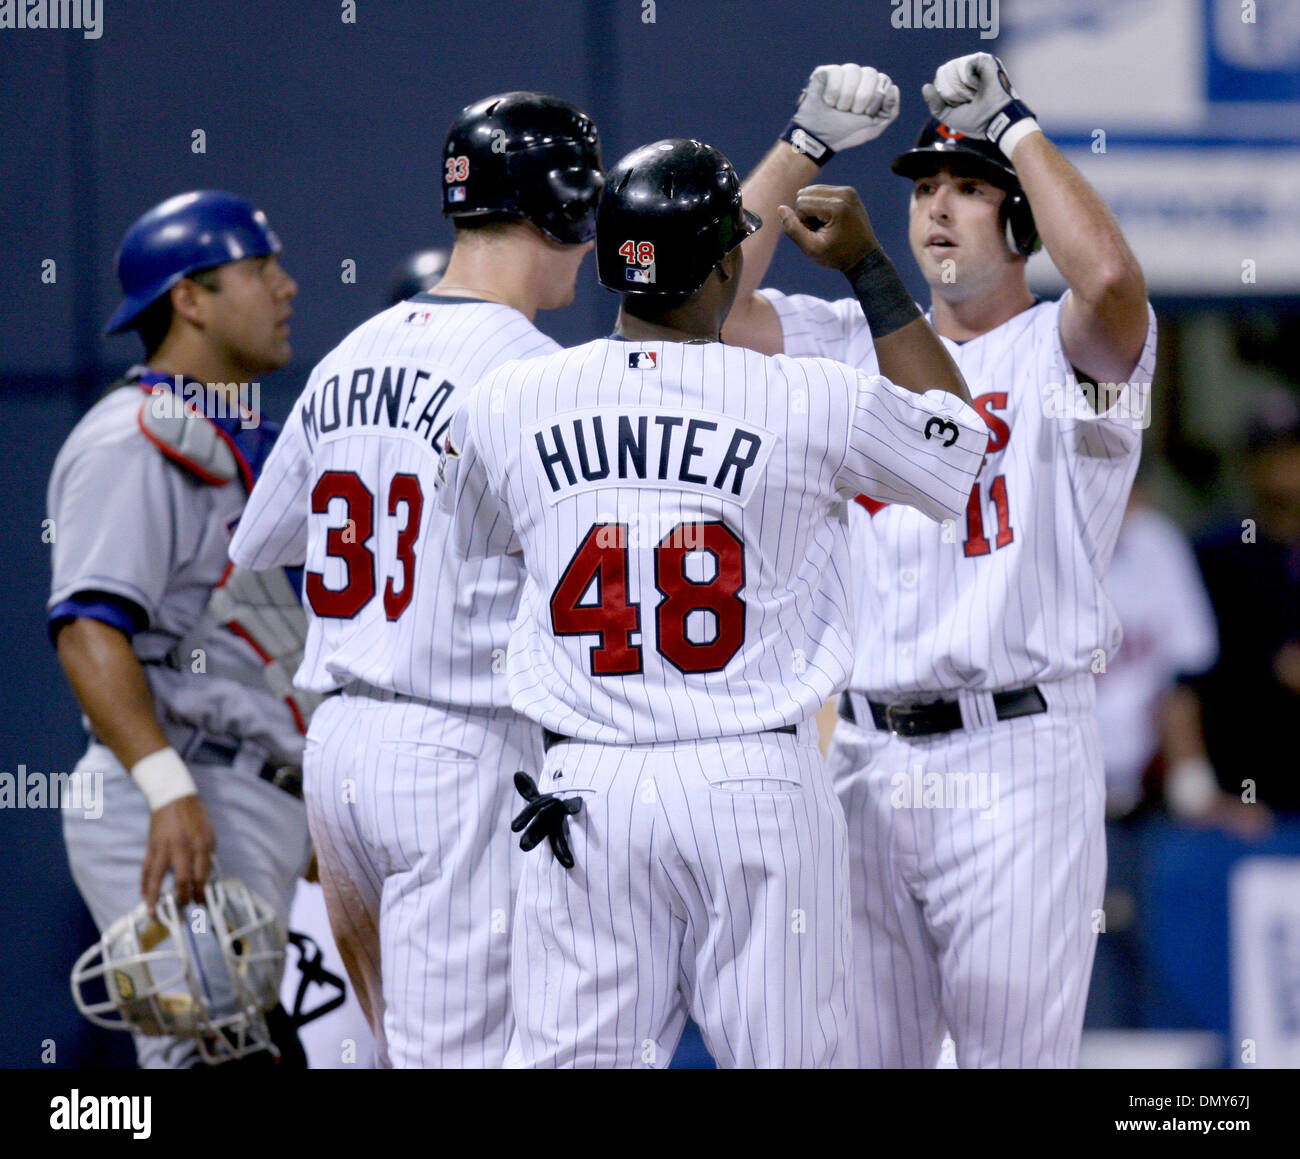 Jun 31, 2006; Minneapolis, MN, USA; Minnesota Twins' Josh Rabe (right) knocked a home run off the Texas Rangers' starter John Rheinecker to bring in Justin Morneau (left) and Torii Hunter (center) who congratulated him at the plate. The Twins defeated the Rangers 15-2 at the Metrodome in Minneapolis, Minnesota, Monday, July 31, 2006.  Mandatory Credit: Photo by Jeff Wheeler/Minneap Stock Photo